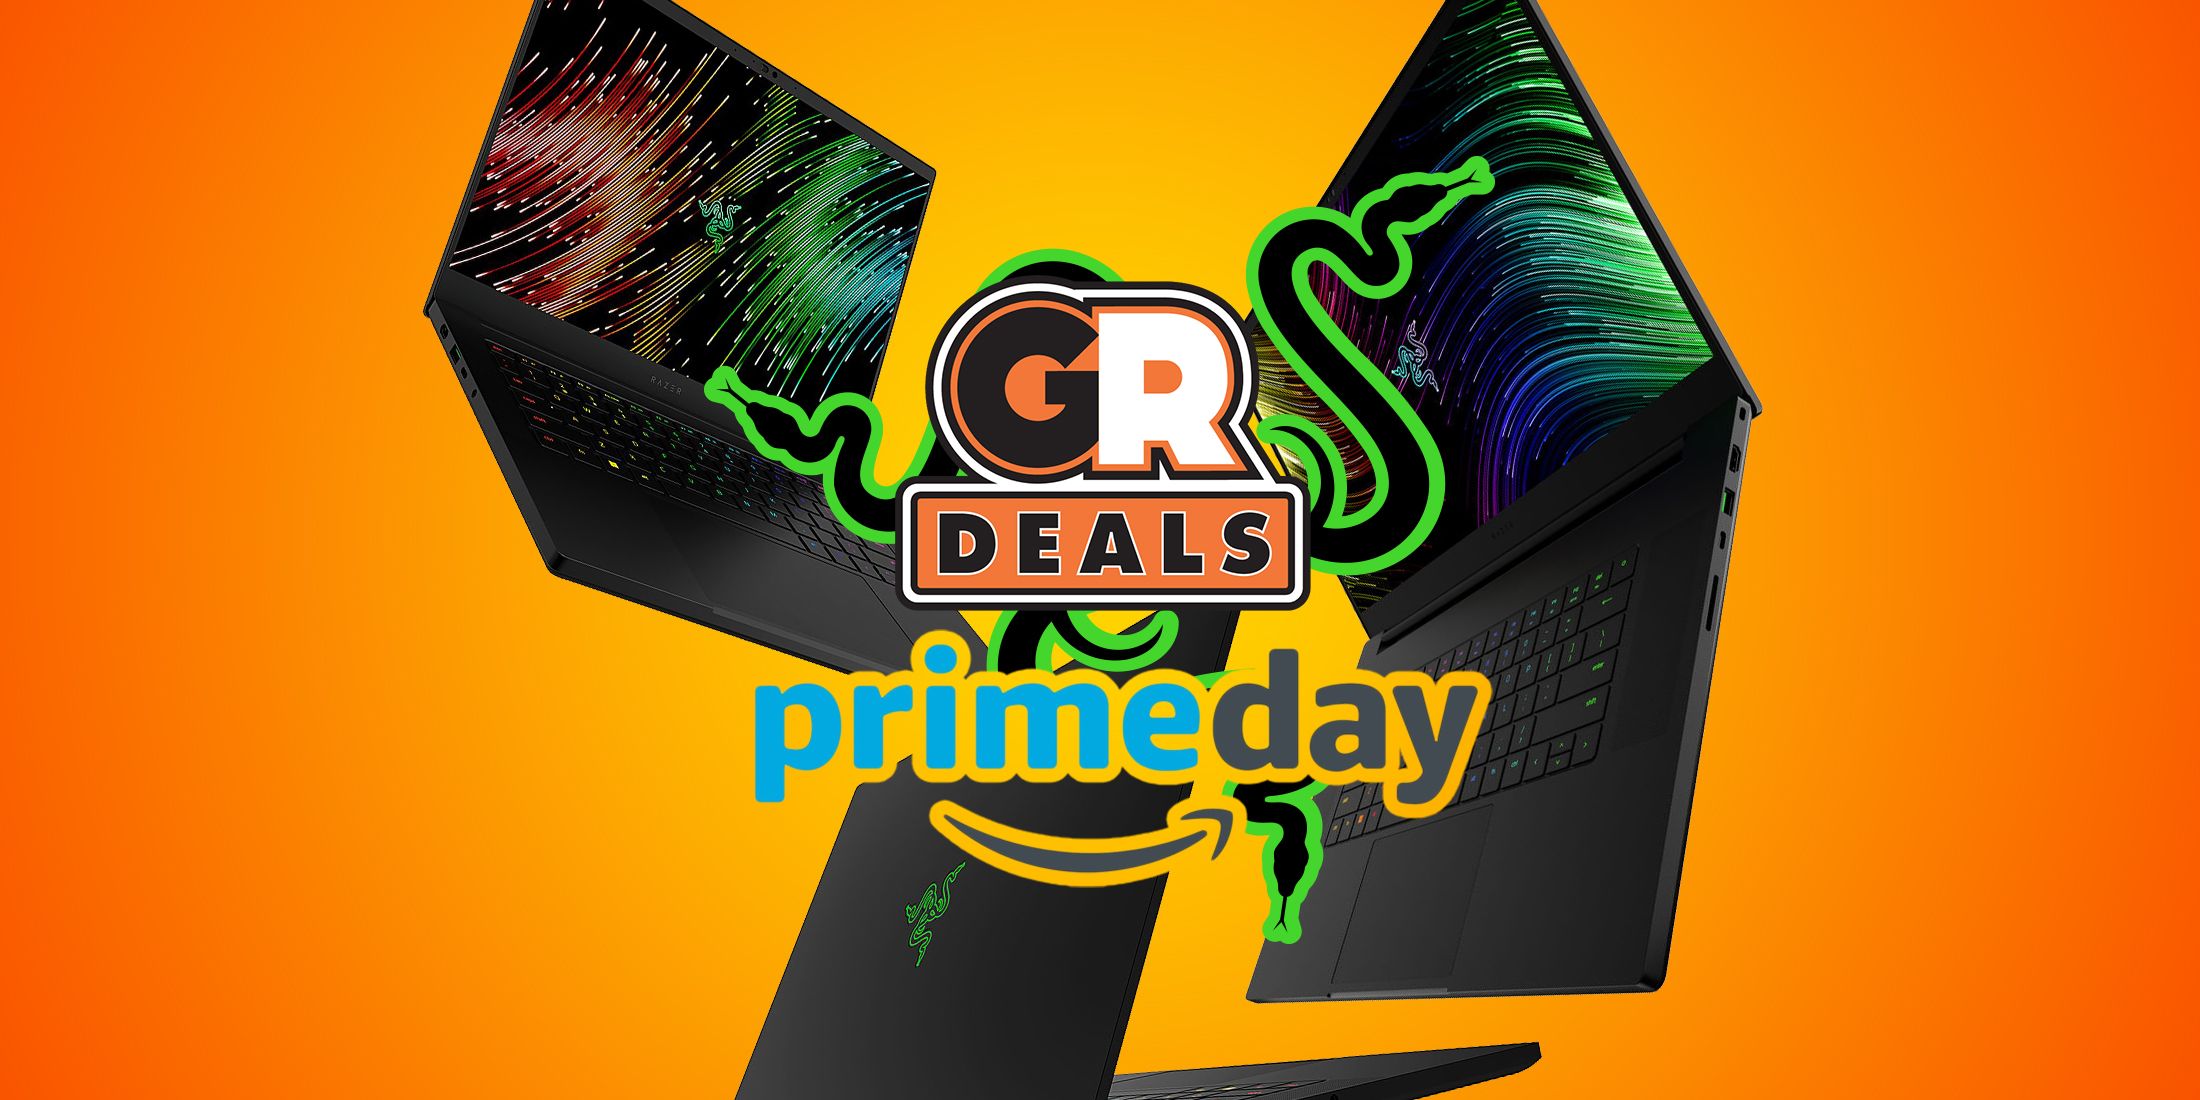 Should You buy a Razer Gaming Laptop this Prime Day?